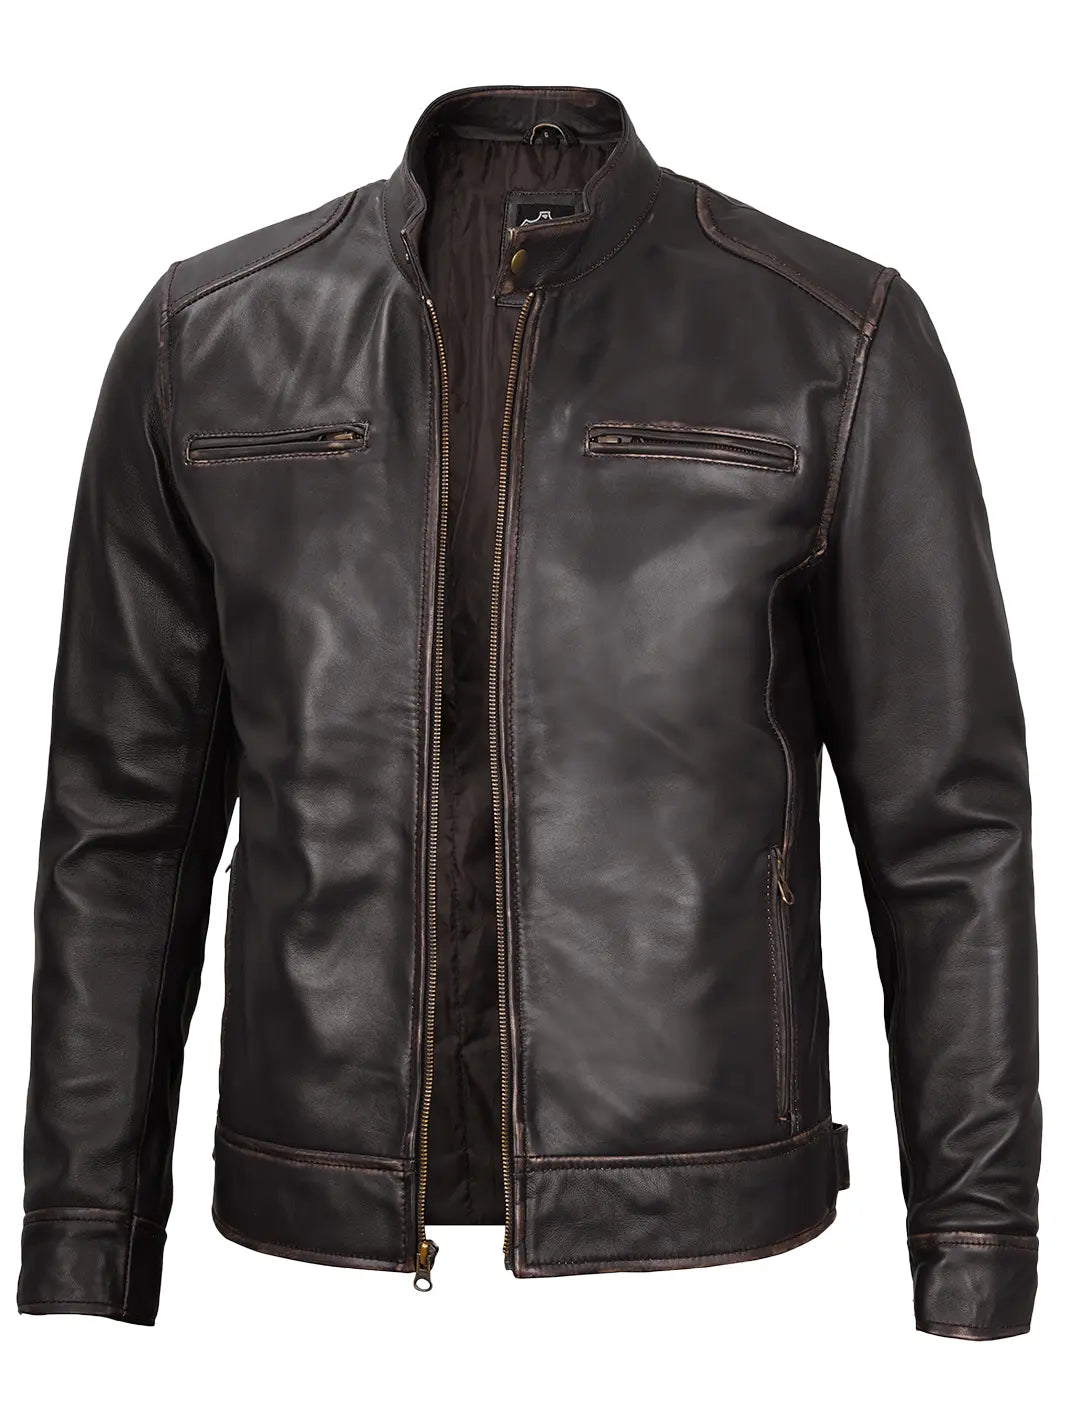 Rub off cafe racer real leather jacket